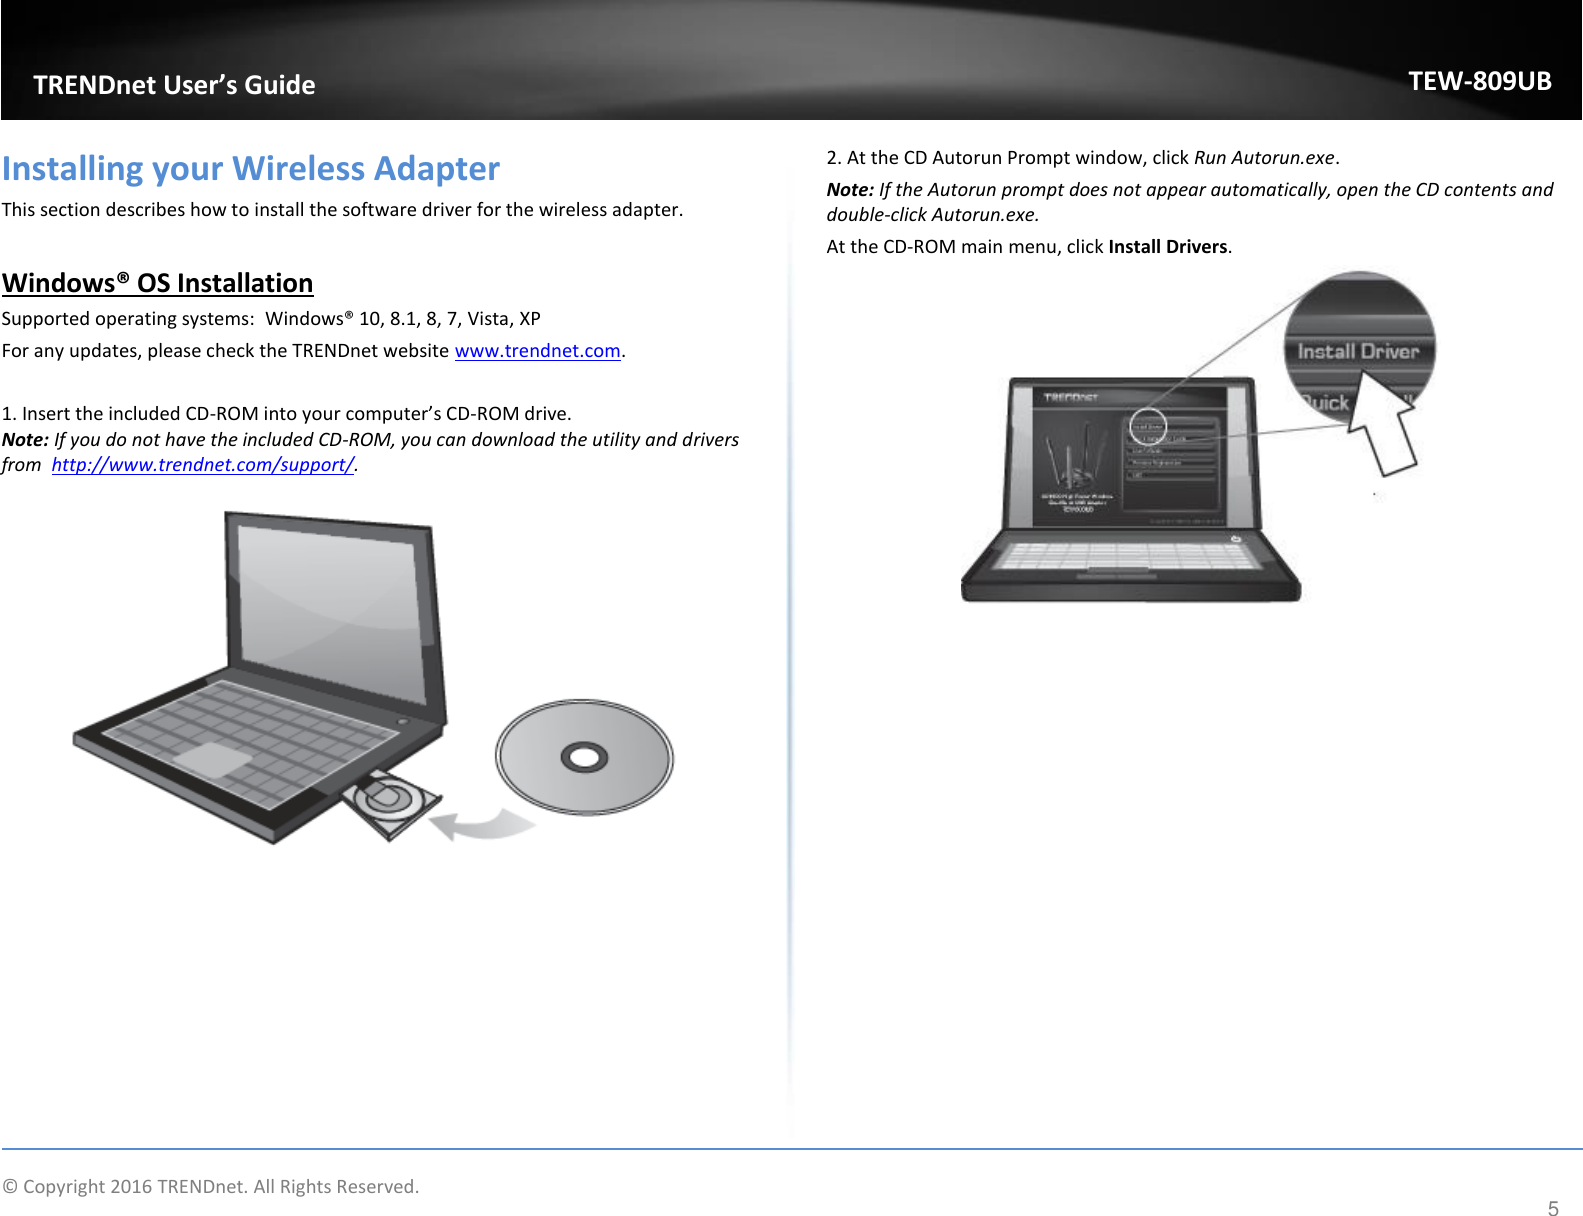                    © Copyright 2016 TRENDnet. All Rights Reserved.       TRENDnet User’s Guide TEW-809UB 5 Installing your Wireless Adapter This section describes how to install the software driver for the wireless adapter.  Windows® OS Installation Supported operating systems:  Windows® 10, 8.1, 8, 7, Vista, XP For any updates, please check the TRENDnet website www.trendnet.com.  1. Insert the included CD-ROM into your computer’s CD-ROM drive.  Note: If you do not have the included CD-ROM, you can download the utility and drivers from  http://www.trendnet.com/support/.   2. At the CD Autorun Prompt window, click Run Autorun.exe.  Note: If the Autorun prompt does not appear automatically, open the CD contents and double-click Autorun.exe.  At the CD-ROM main menu, click Install Drivers.     